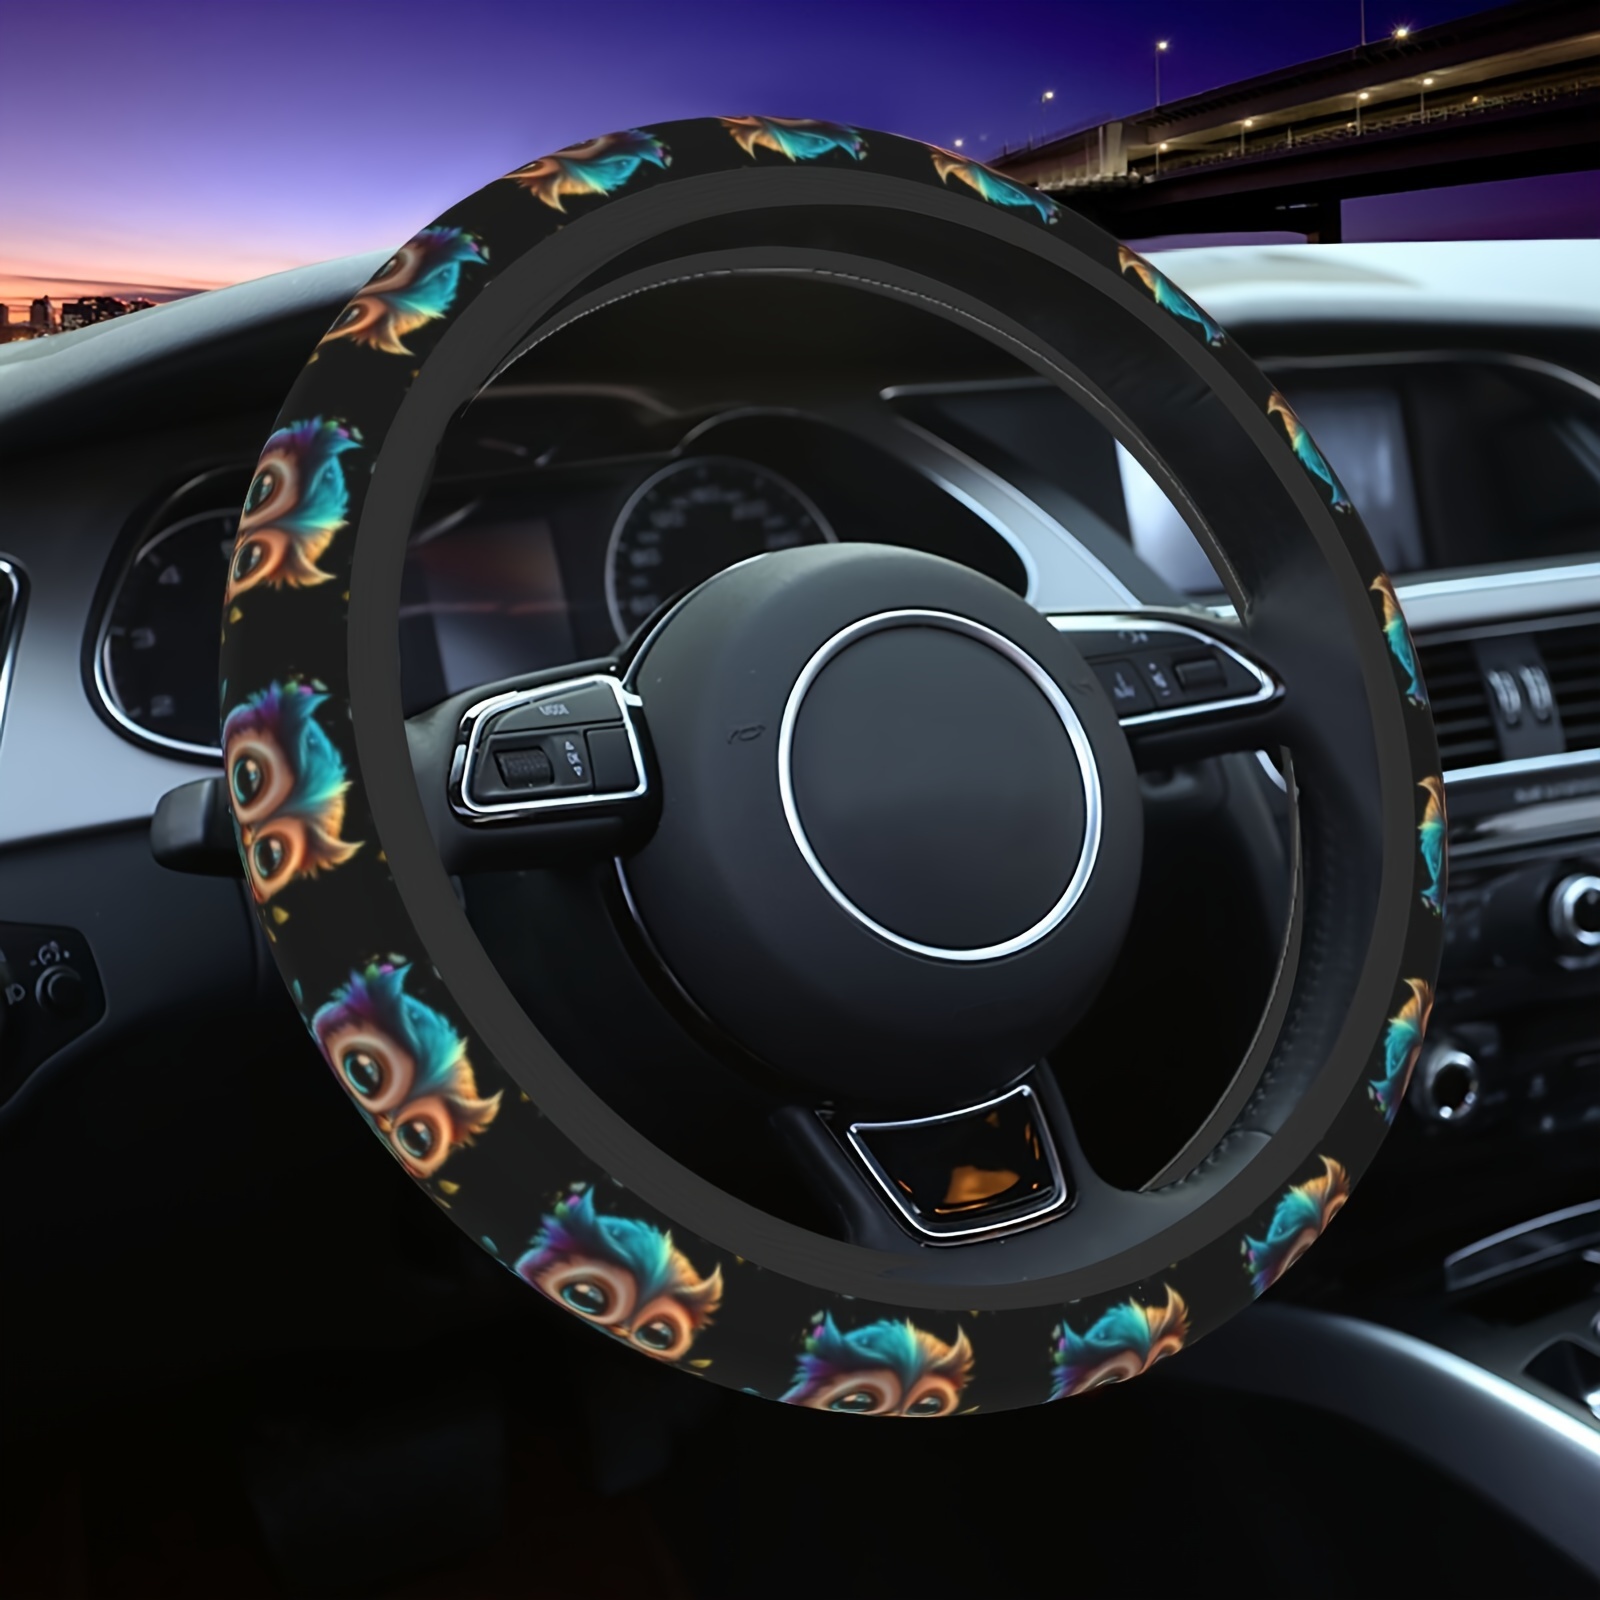 

1pc Colorful Owl Elastic Stretch Steering Wheel Cover, Universal Car Accessories For Men Women, Without Inner Ring, Anti-slip Steering Wheel Protector